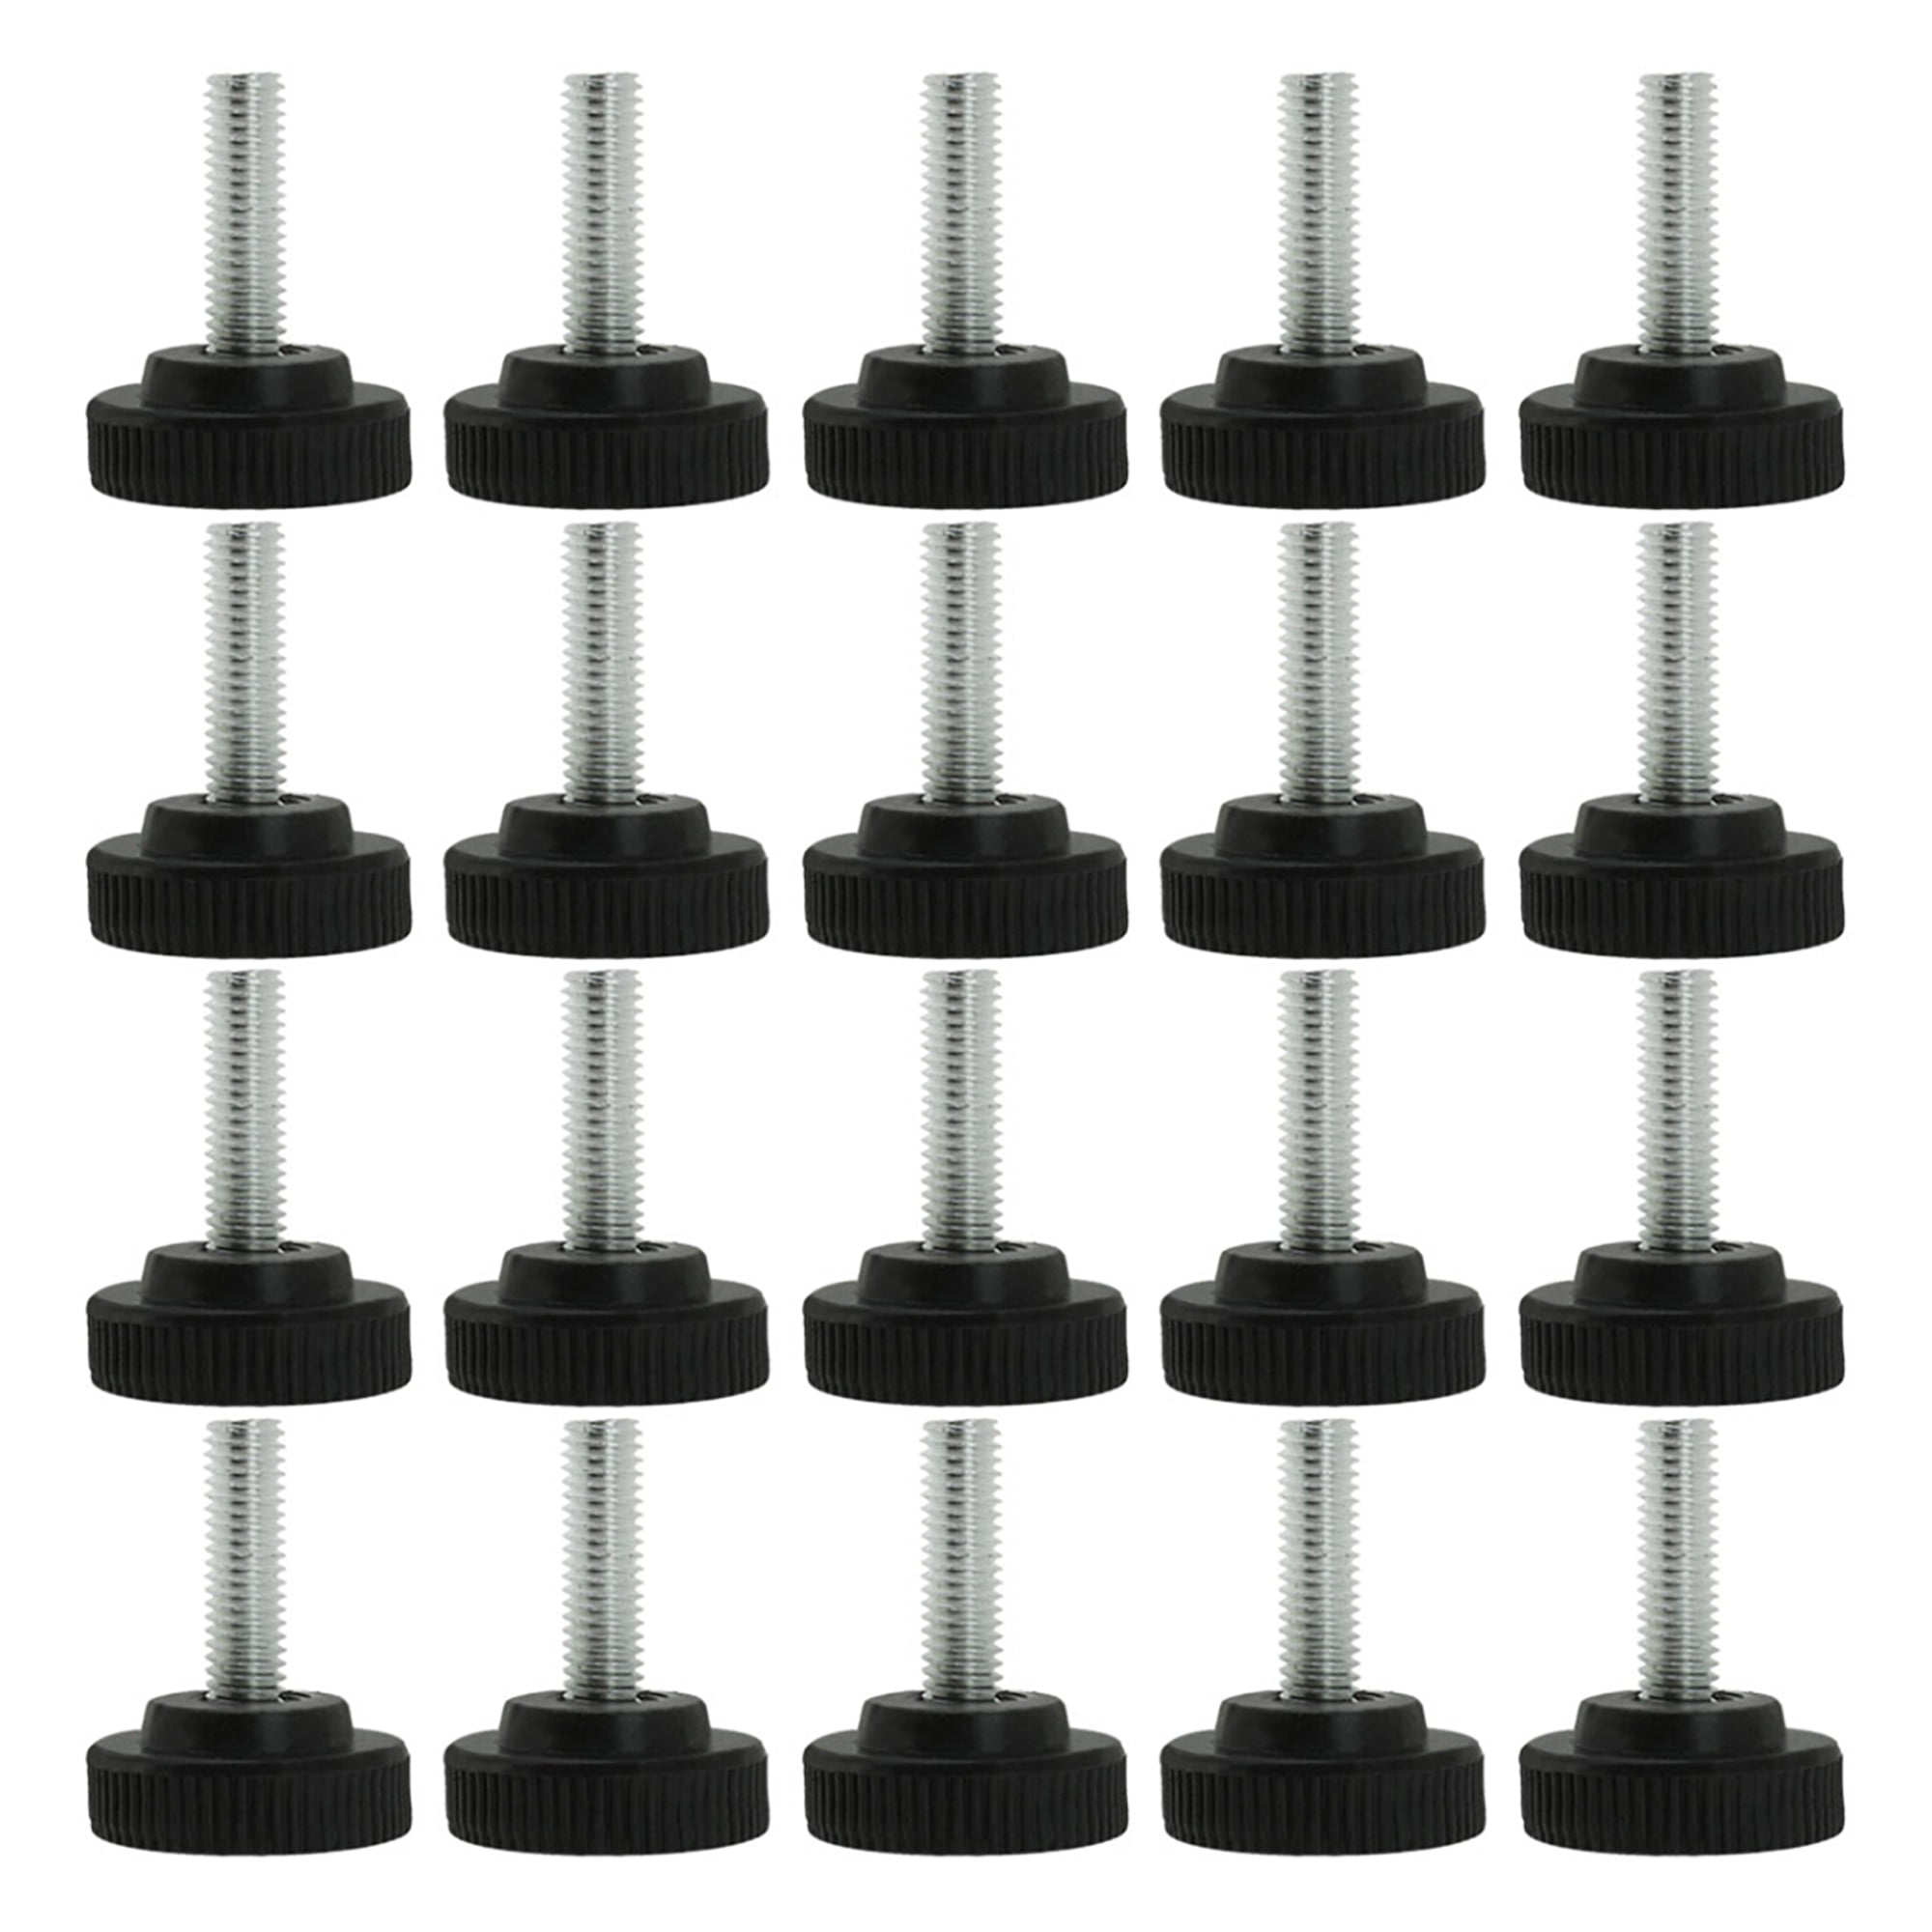 Adjustable Levelling Feet/foot M8 x 38 thread table desk cabinet Packs of 4 8 12 